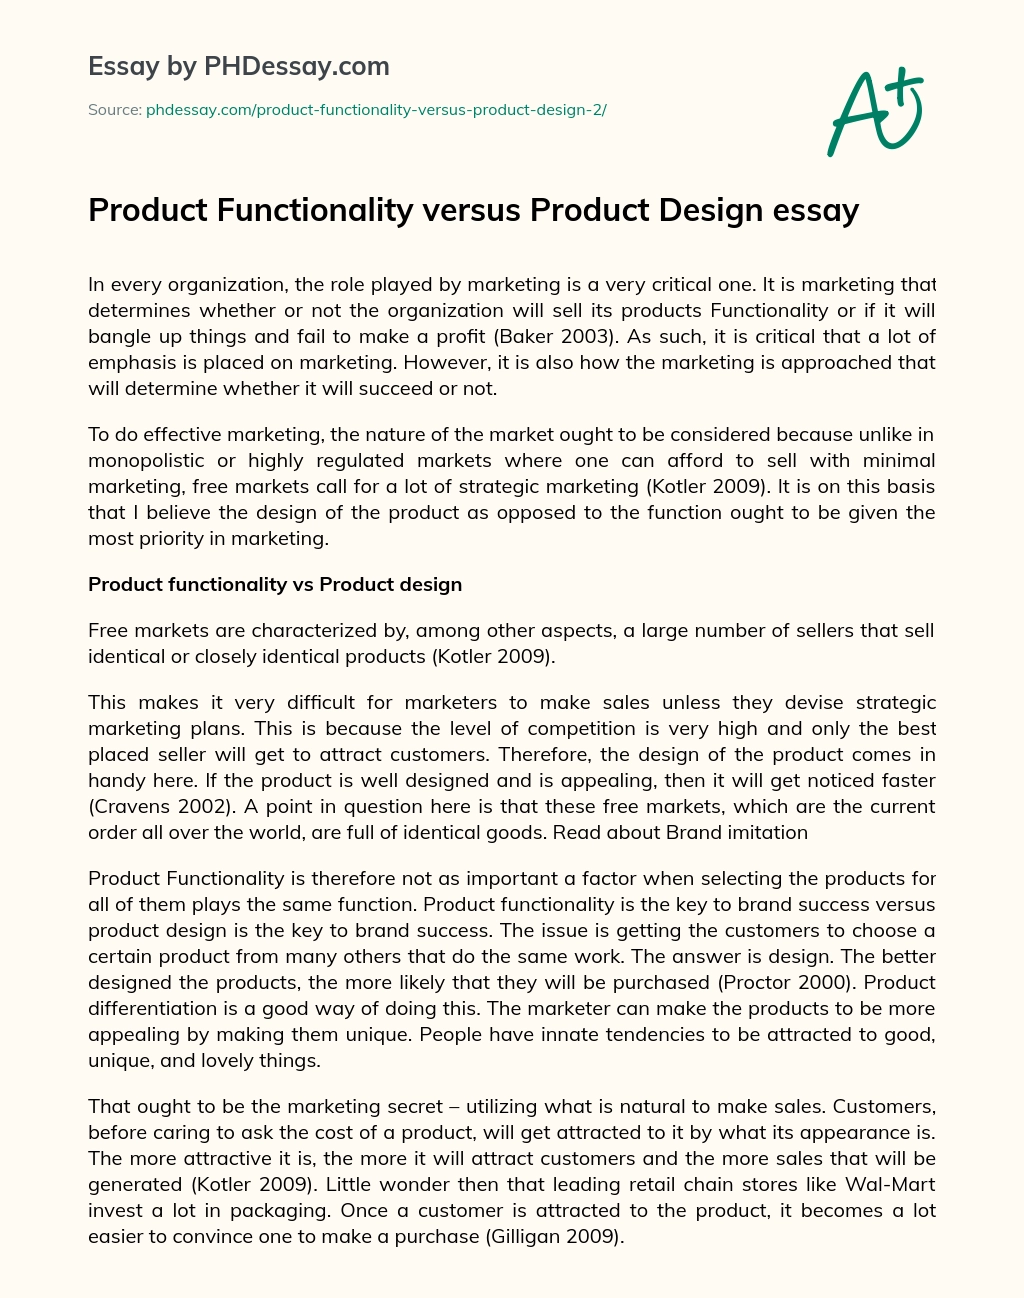 Product Functionality versus Product Design essay essay